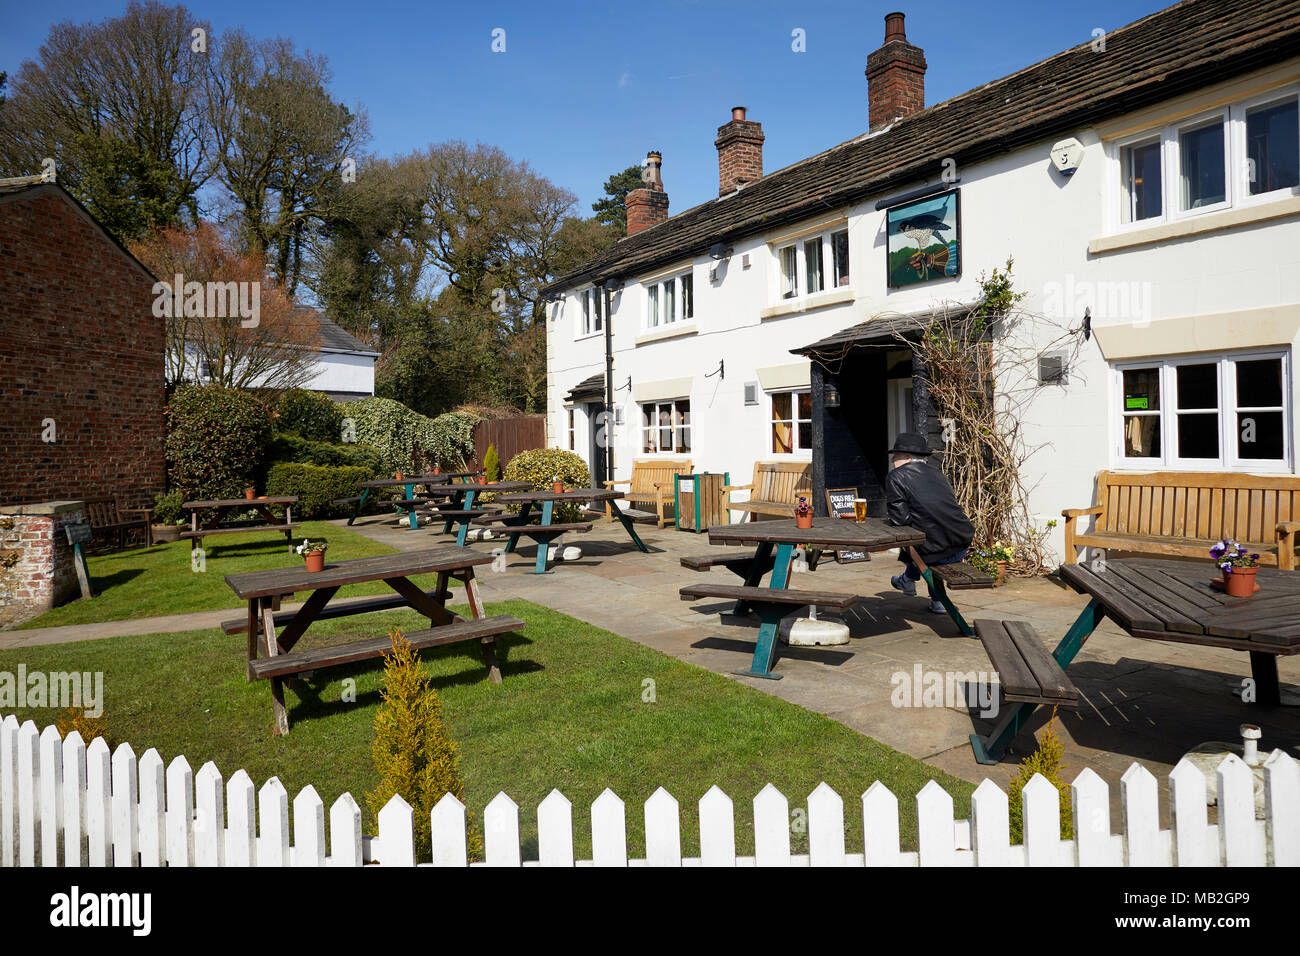 Bird in Hand, Mobberley, Knolls Green Village, Knutsford, CHESHIRE traditional 18th century roadside COUNTRY pub with front beer garden Stock Photo